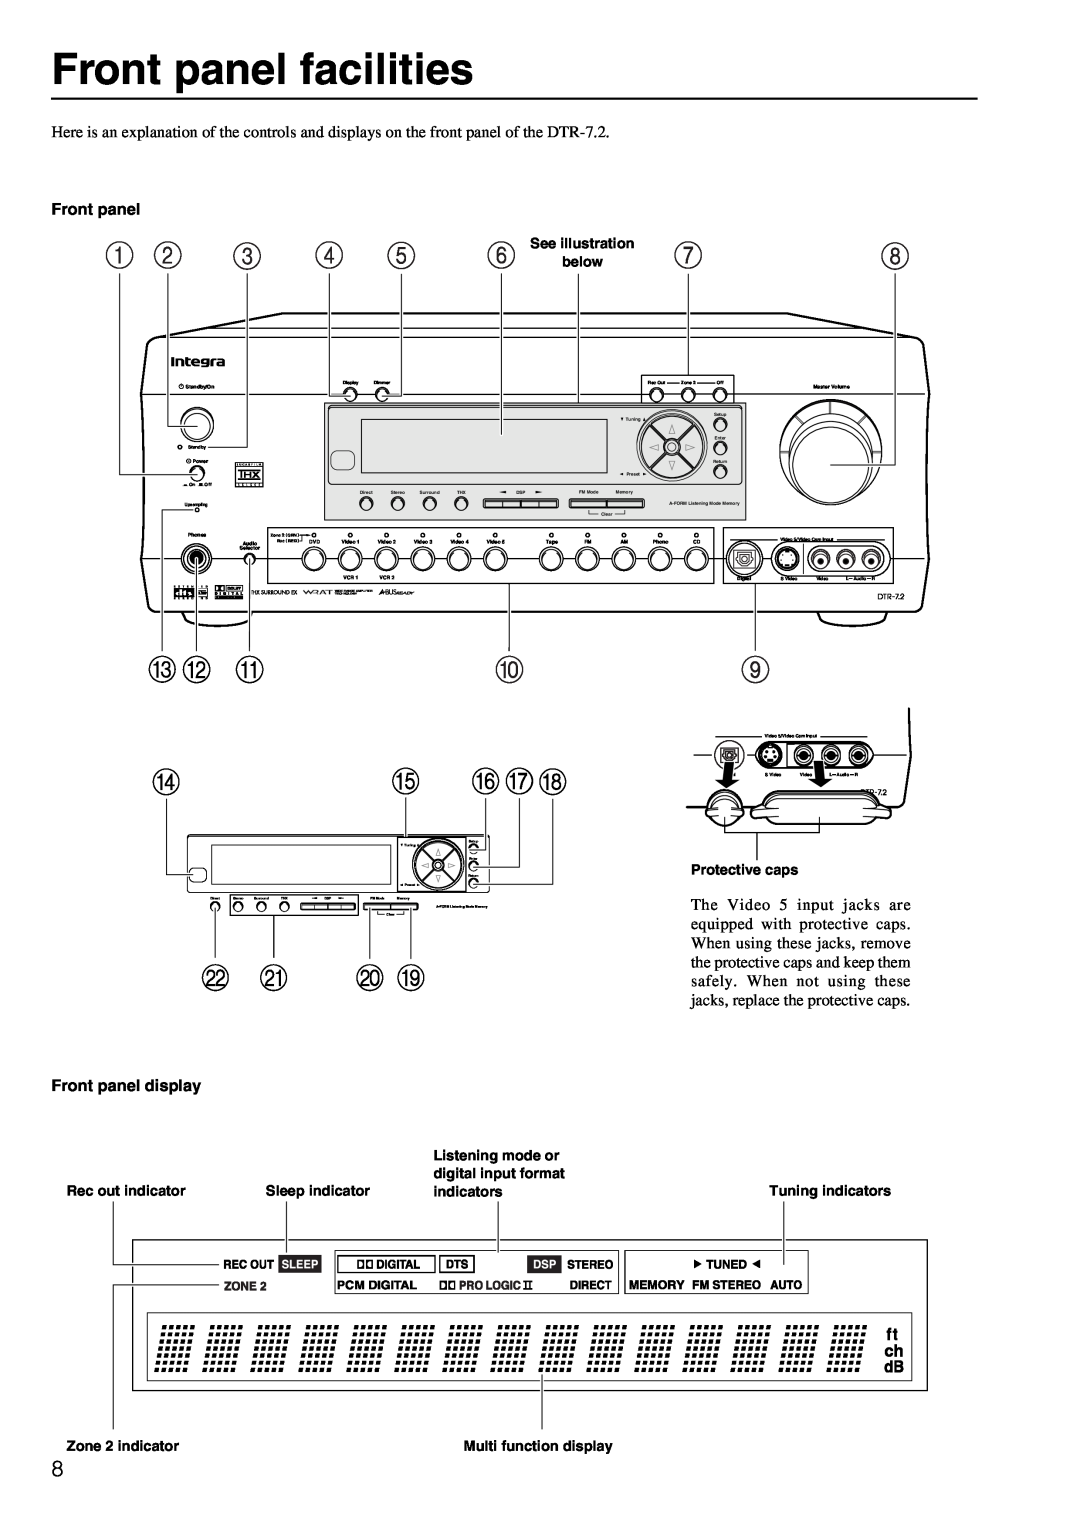 Integra DTR-7.2 instruction manual Front panel facilities, Front panel display 